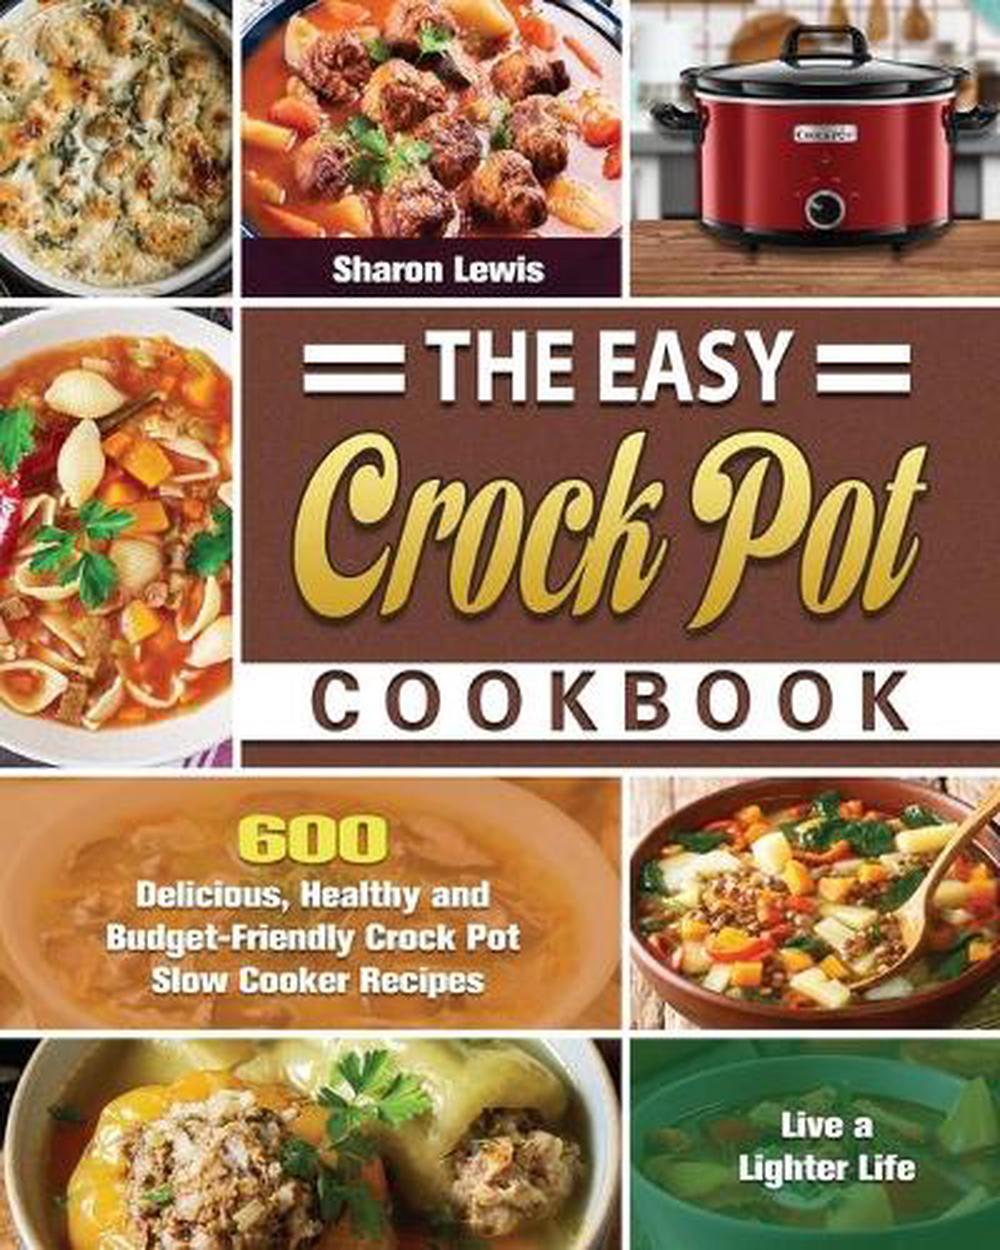 Easy Crock Pot Cookbook by Sharon Lewis (English) Paperback Book Free ...